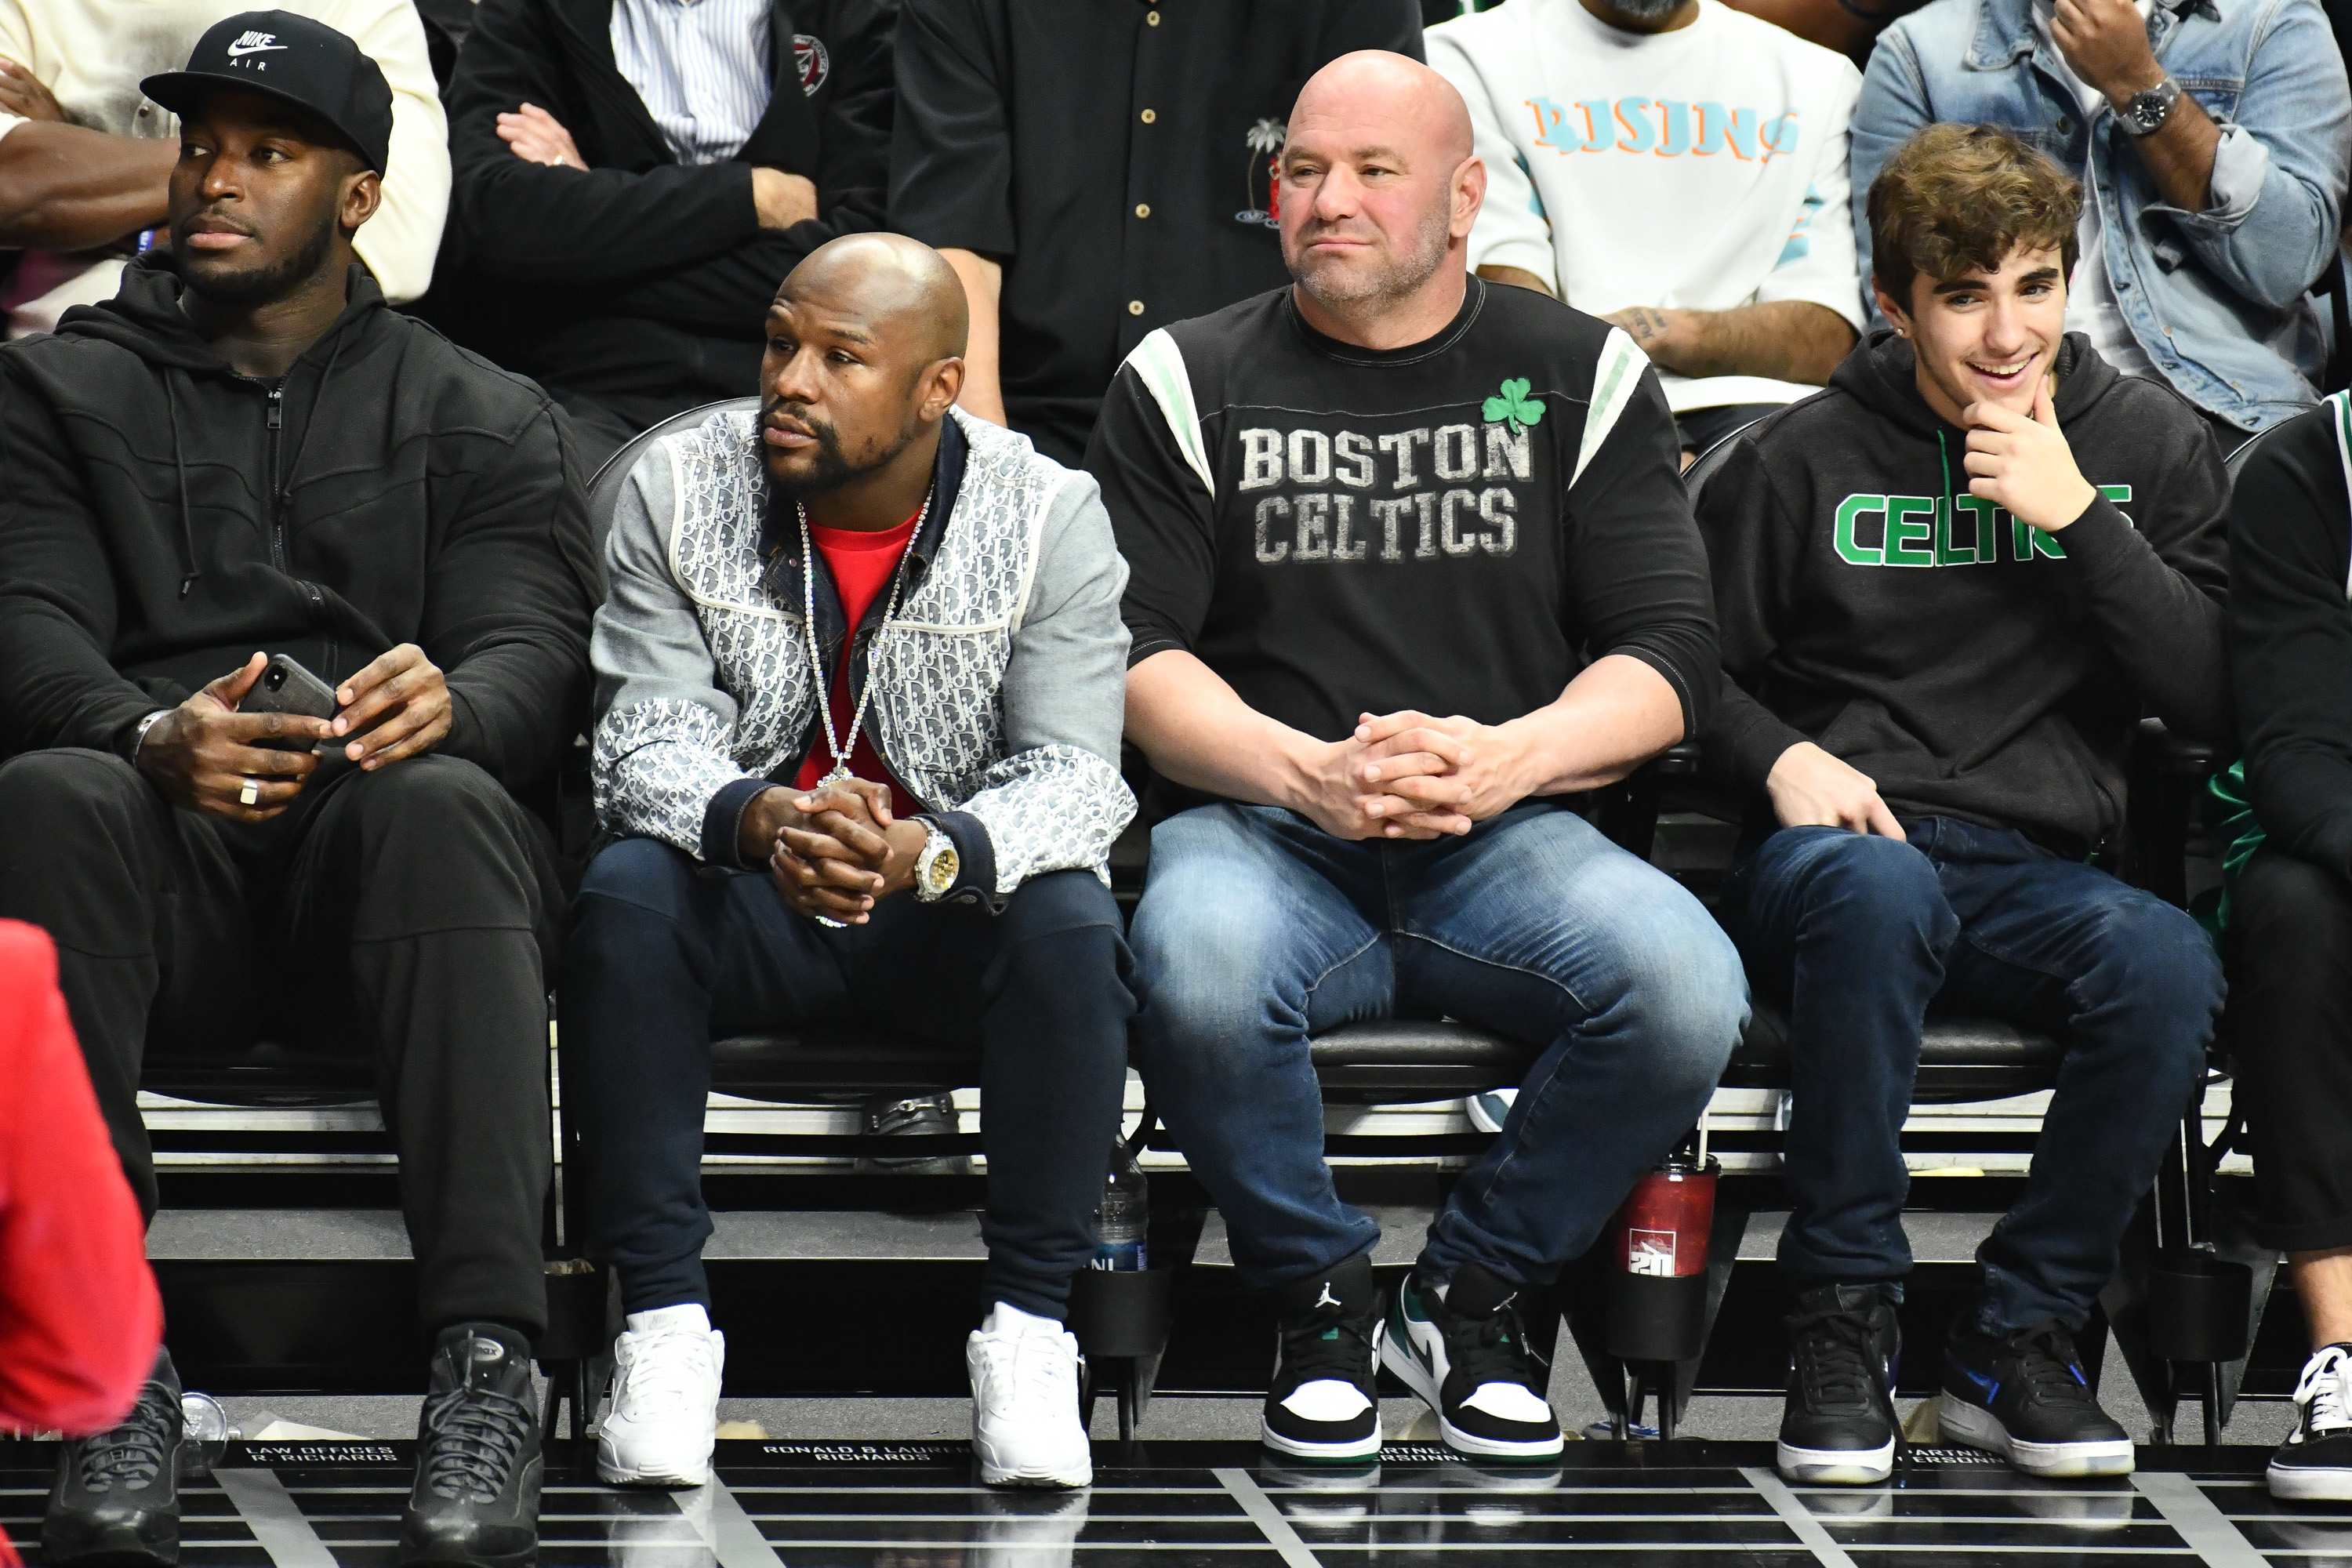 Floyd Mayweather said he and Dana White will be doing business soon.